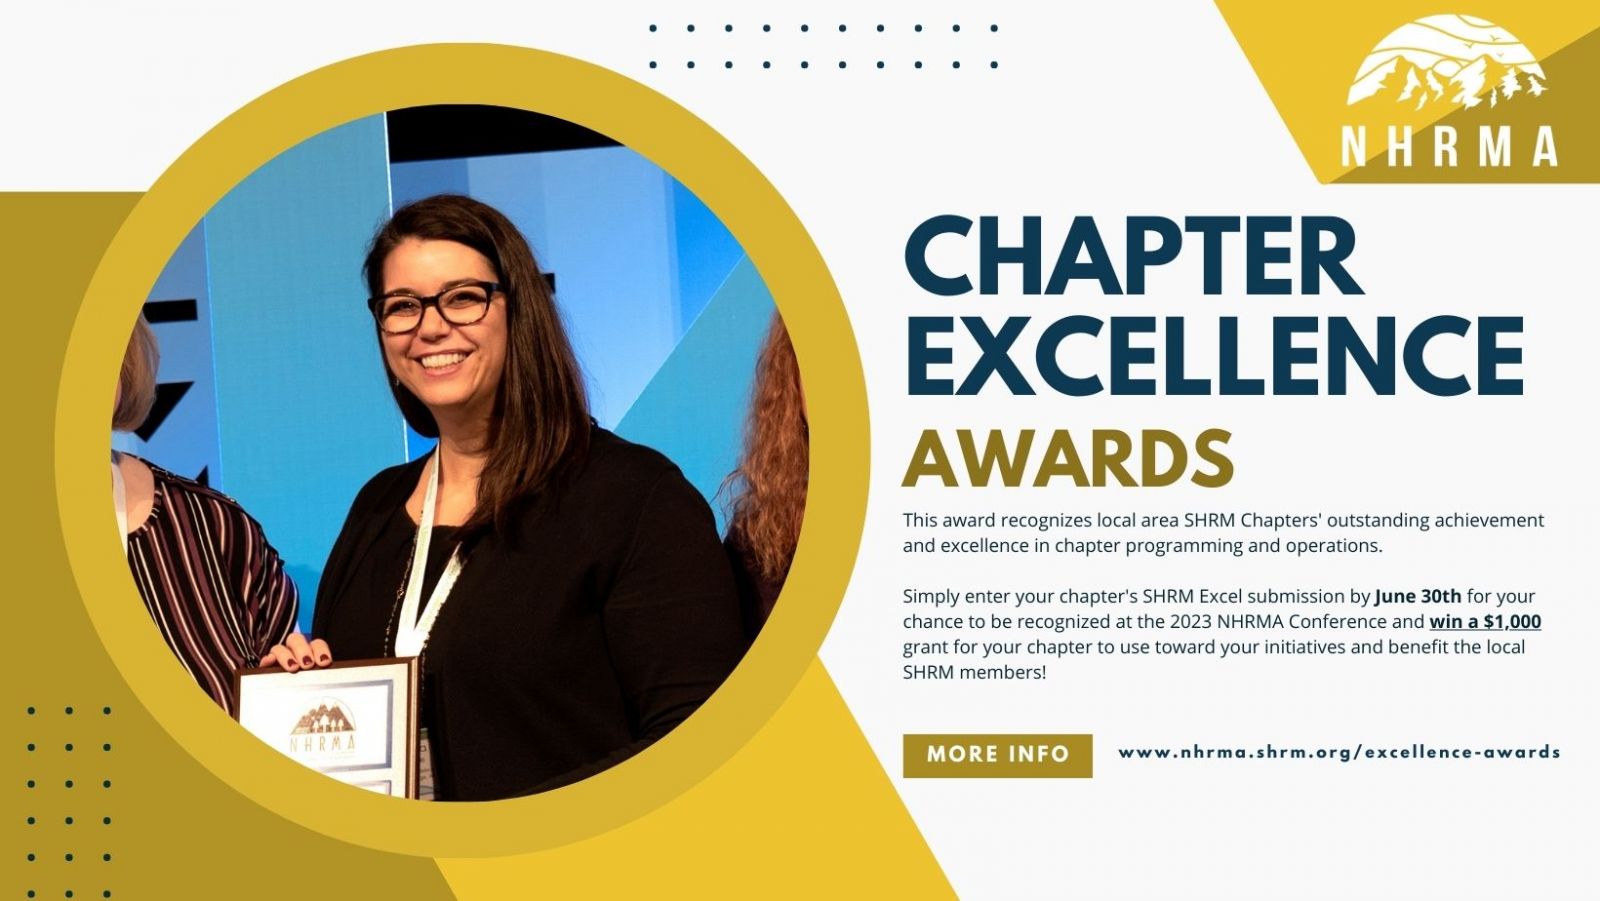 NHRMA Chapter Excellence Awards - Nominations Open Through June 30 2023